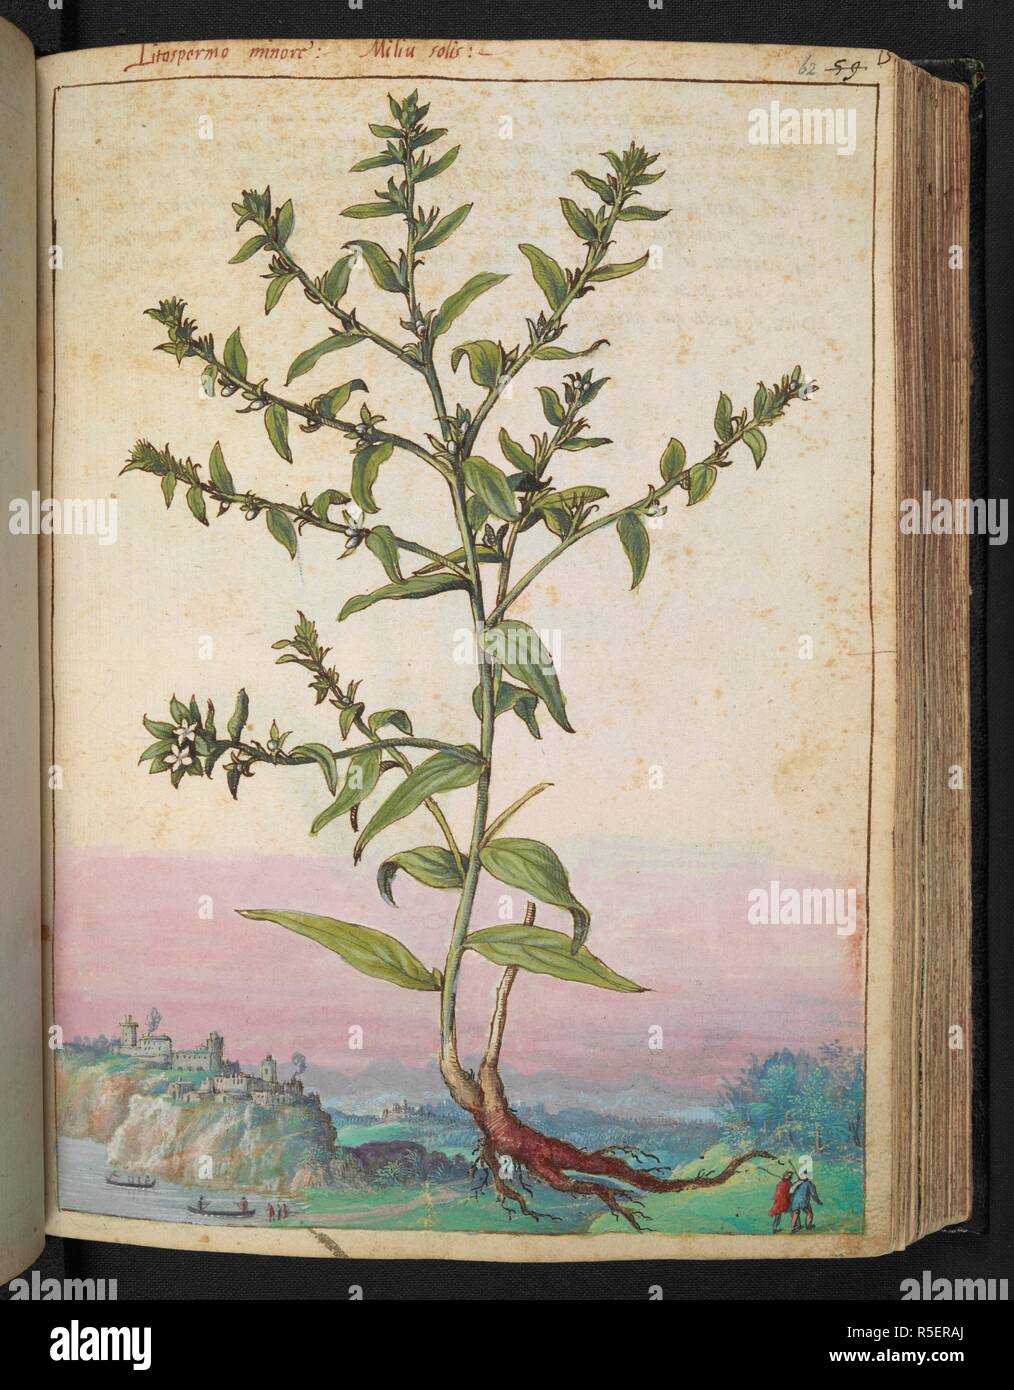 Litospermo minore.   Lithospermum. A genus of plants belonging to the family Boraginaceae. Species are known generally as gromwells or stoneseeds. Coloured drawings of plants, copied from nature in the Roman States, by Gerardo Cibo. Vol. I. Pietro Andrea Mattioli, Physician, of Siena: Extracts from his edition of Dioscorides' 'de re Medica':. Italy, c. 1564-1584. Source: Add. 22332 f.62. Language: Italian. Author: Cibo, Gheraldo. Stock Photo